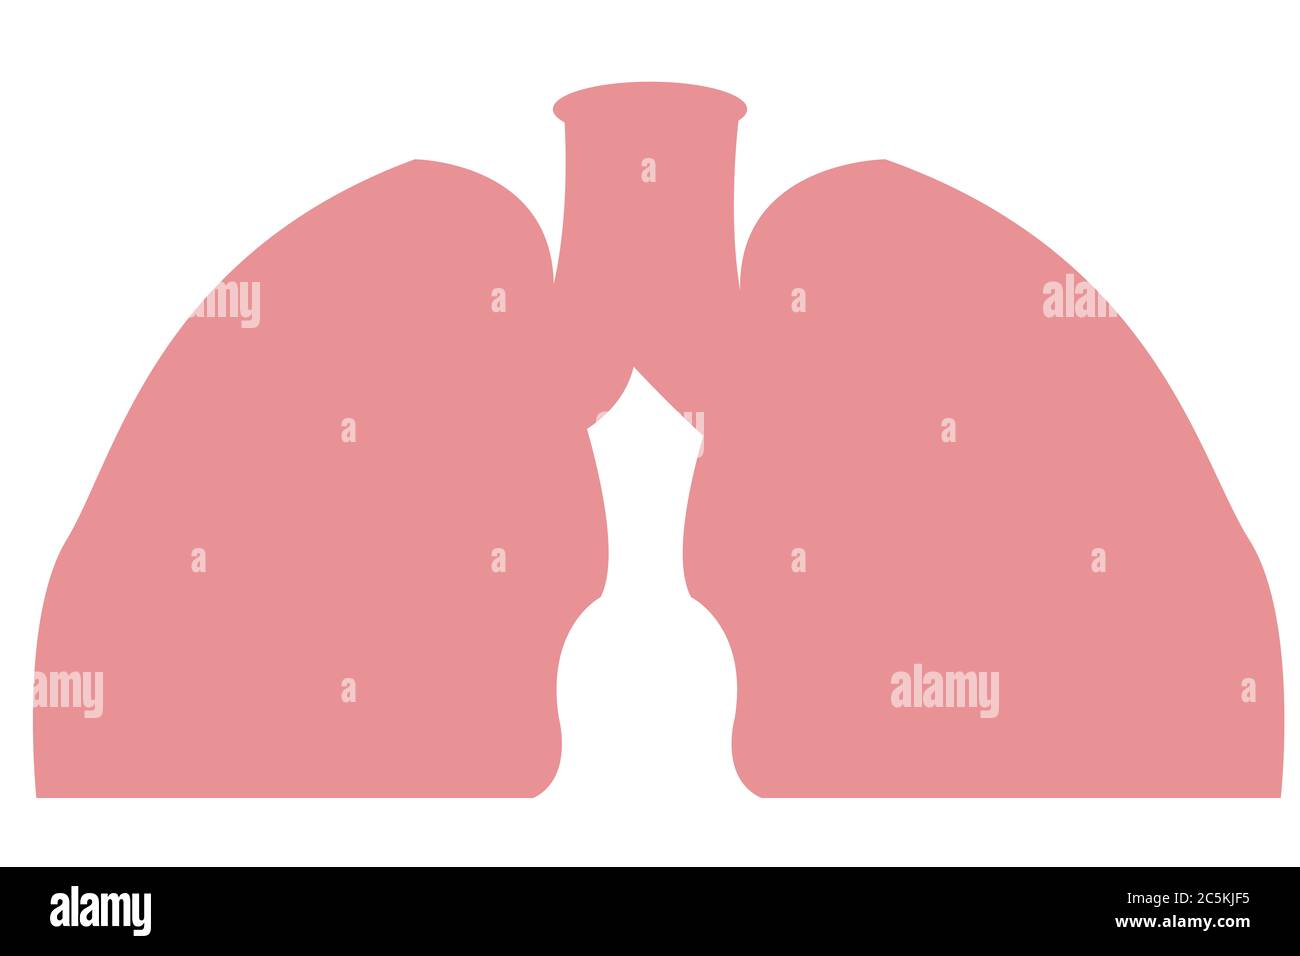 Human Lungs Attack by Covid 19 or Corona Virus.Lungs Vector.Human Respiratory System Lungs Anatomy.lungs organ.Medical illustration. Stock Photo